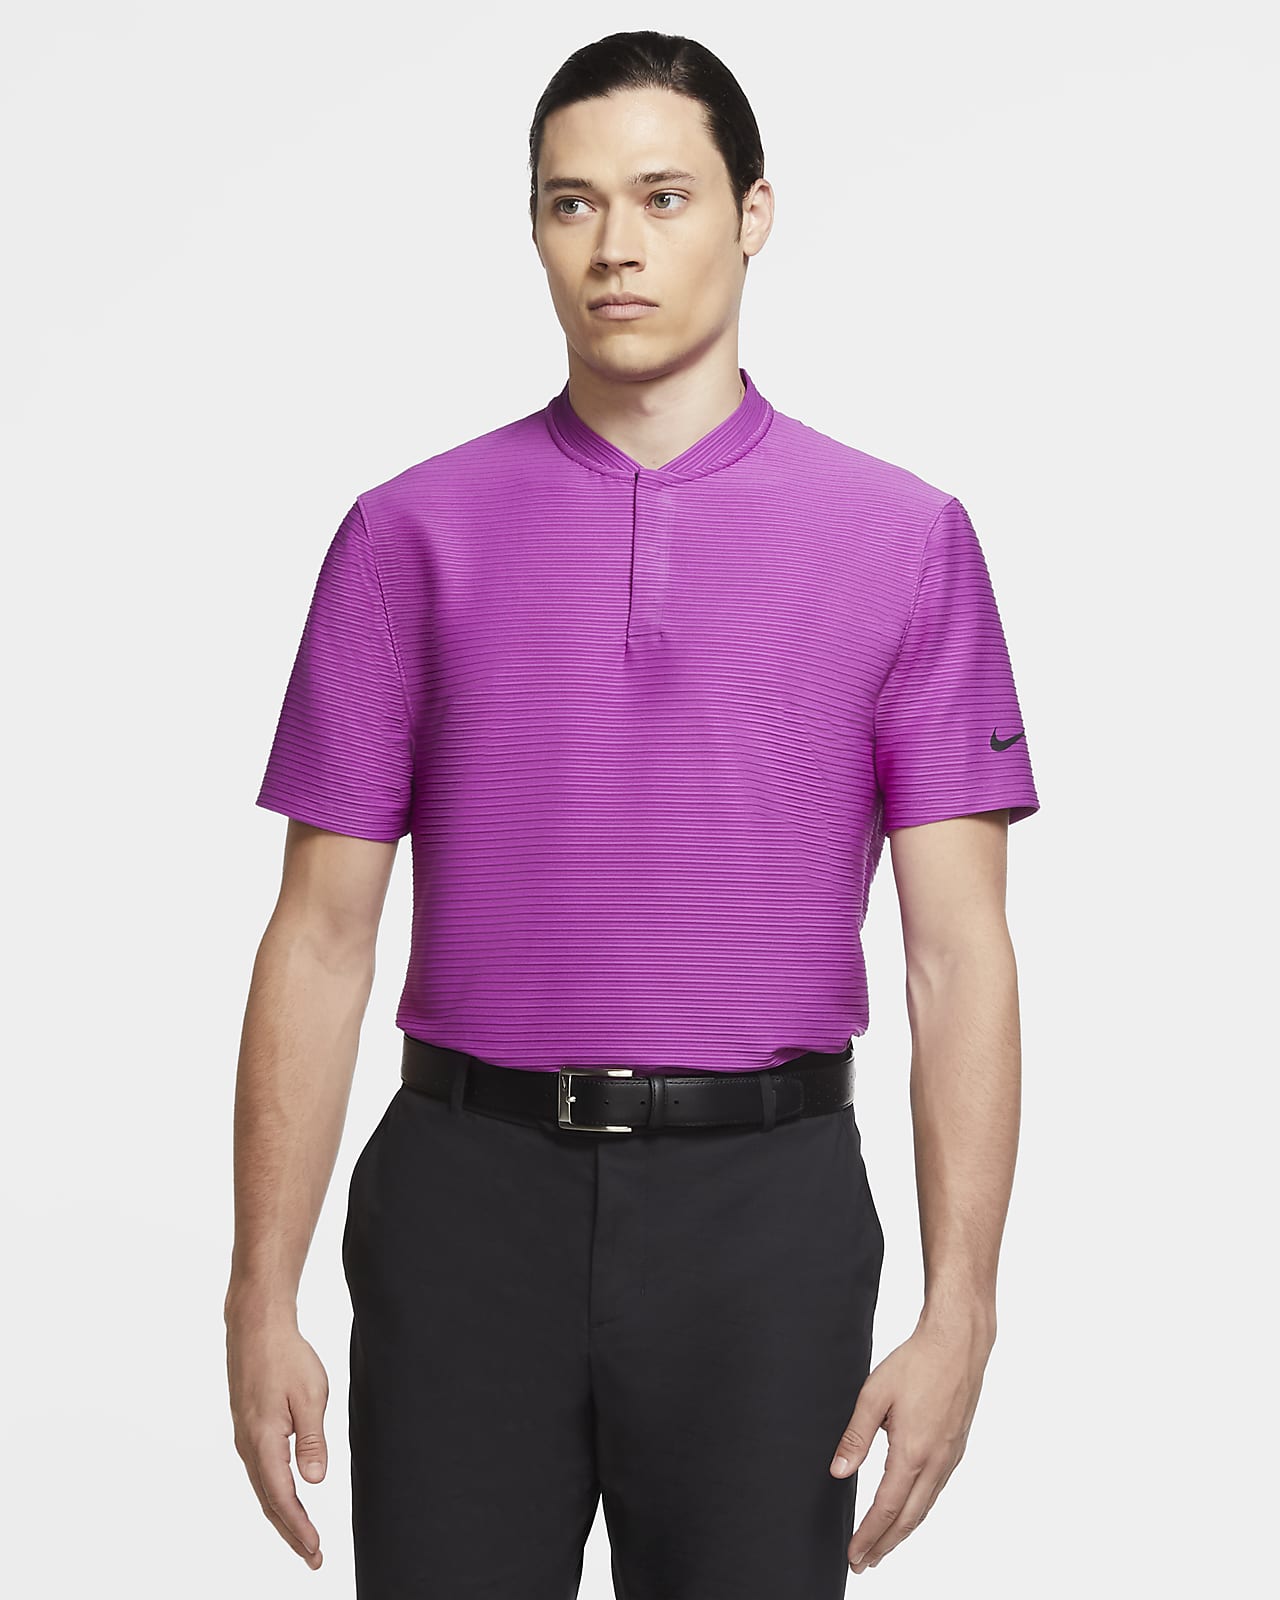 tiger woods polo